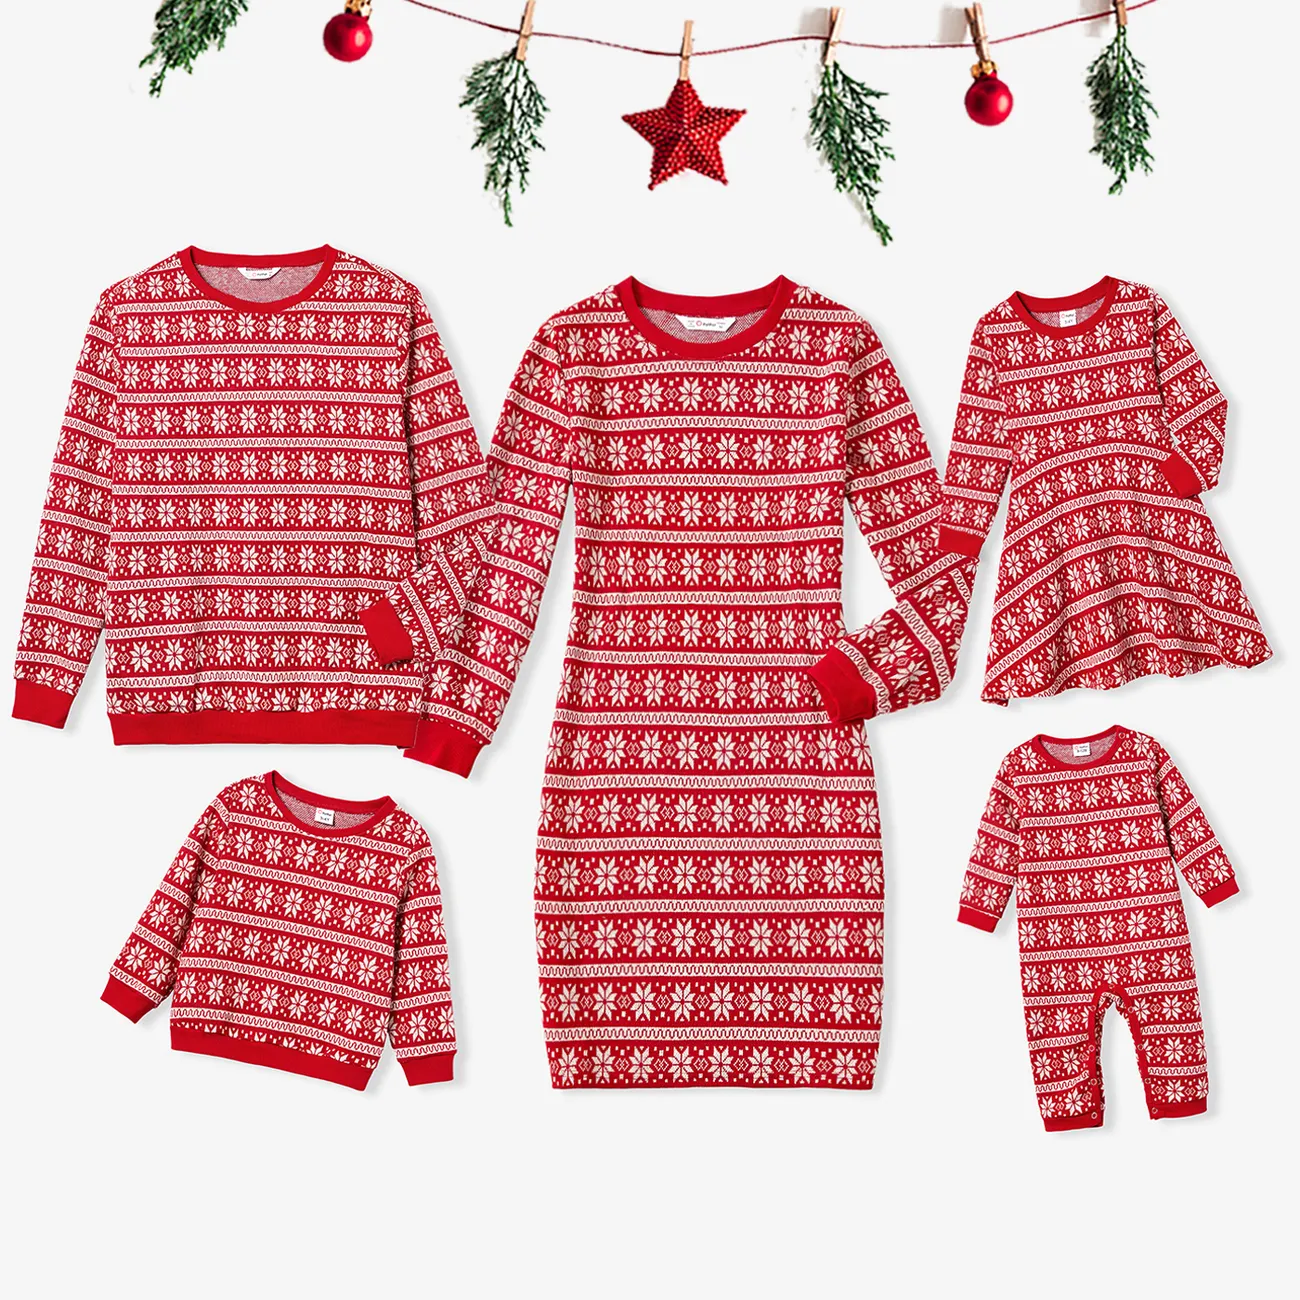 Christmas Family Matching Snowflake Print Cotton Long Sleeve Knit Tops and Dresses Sets Red big image 1